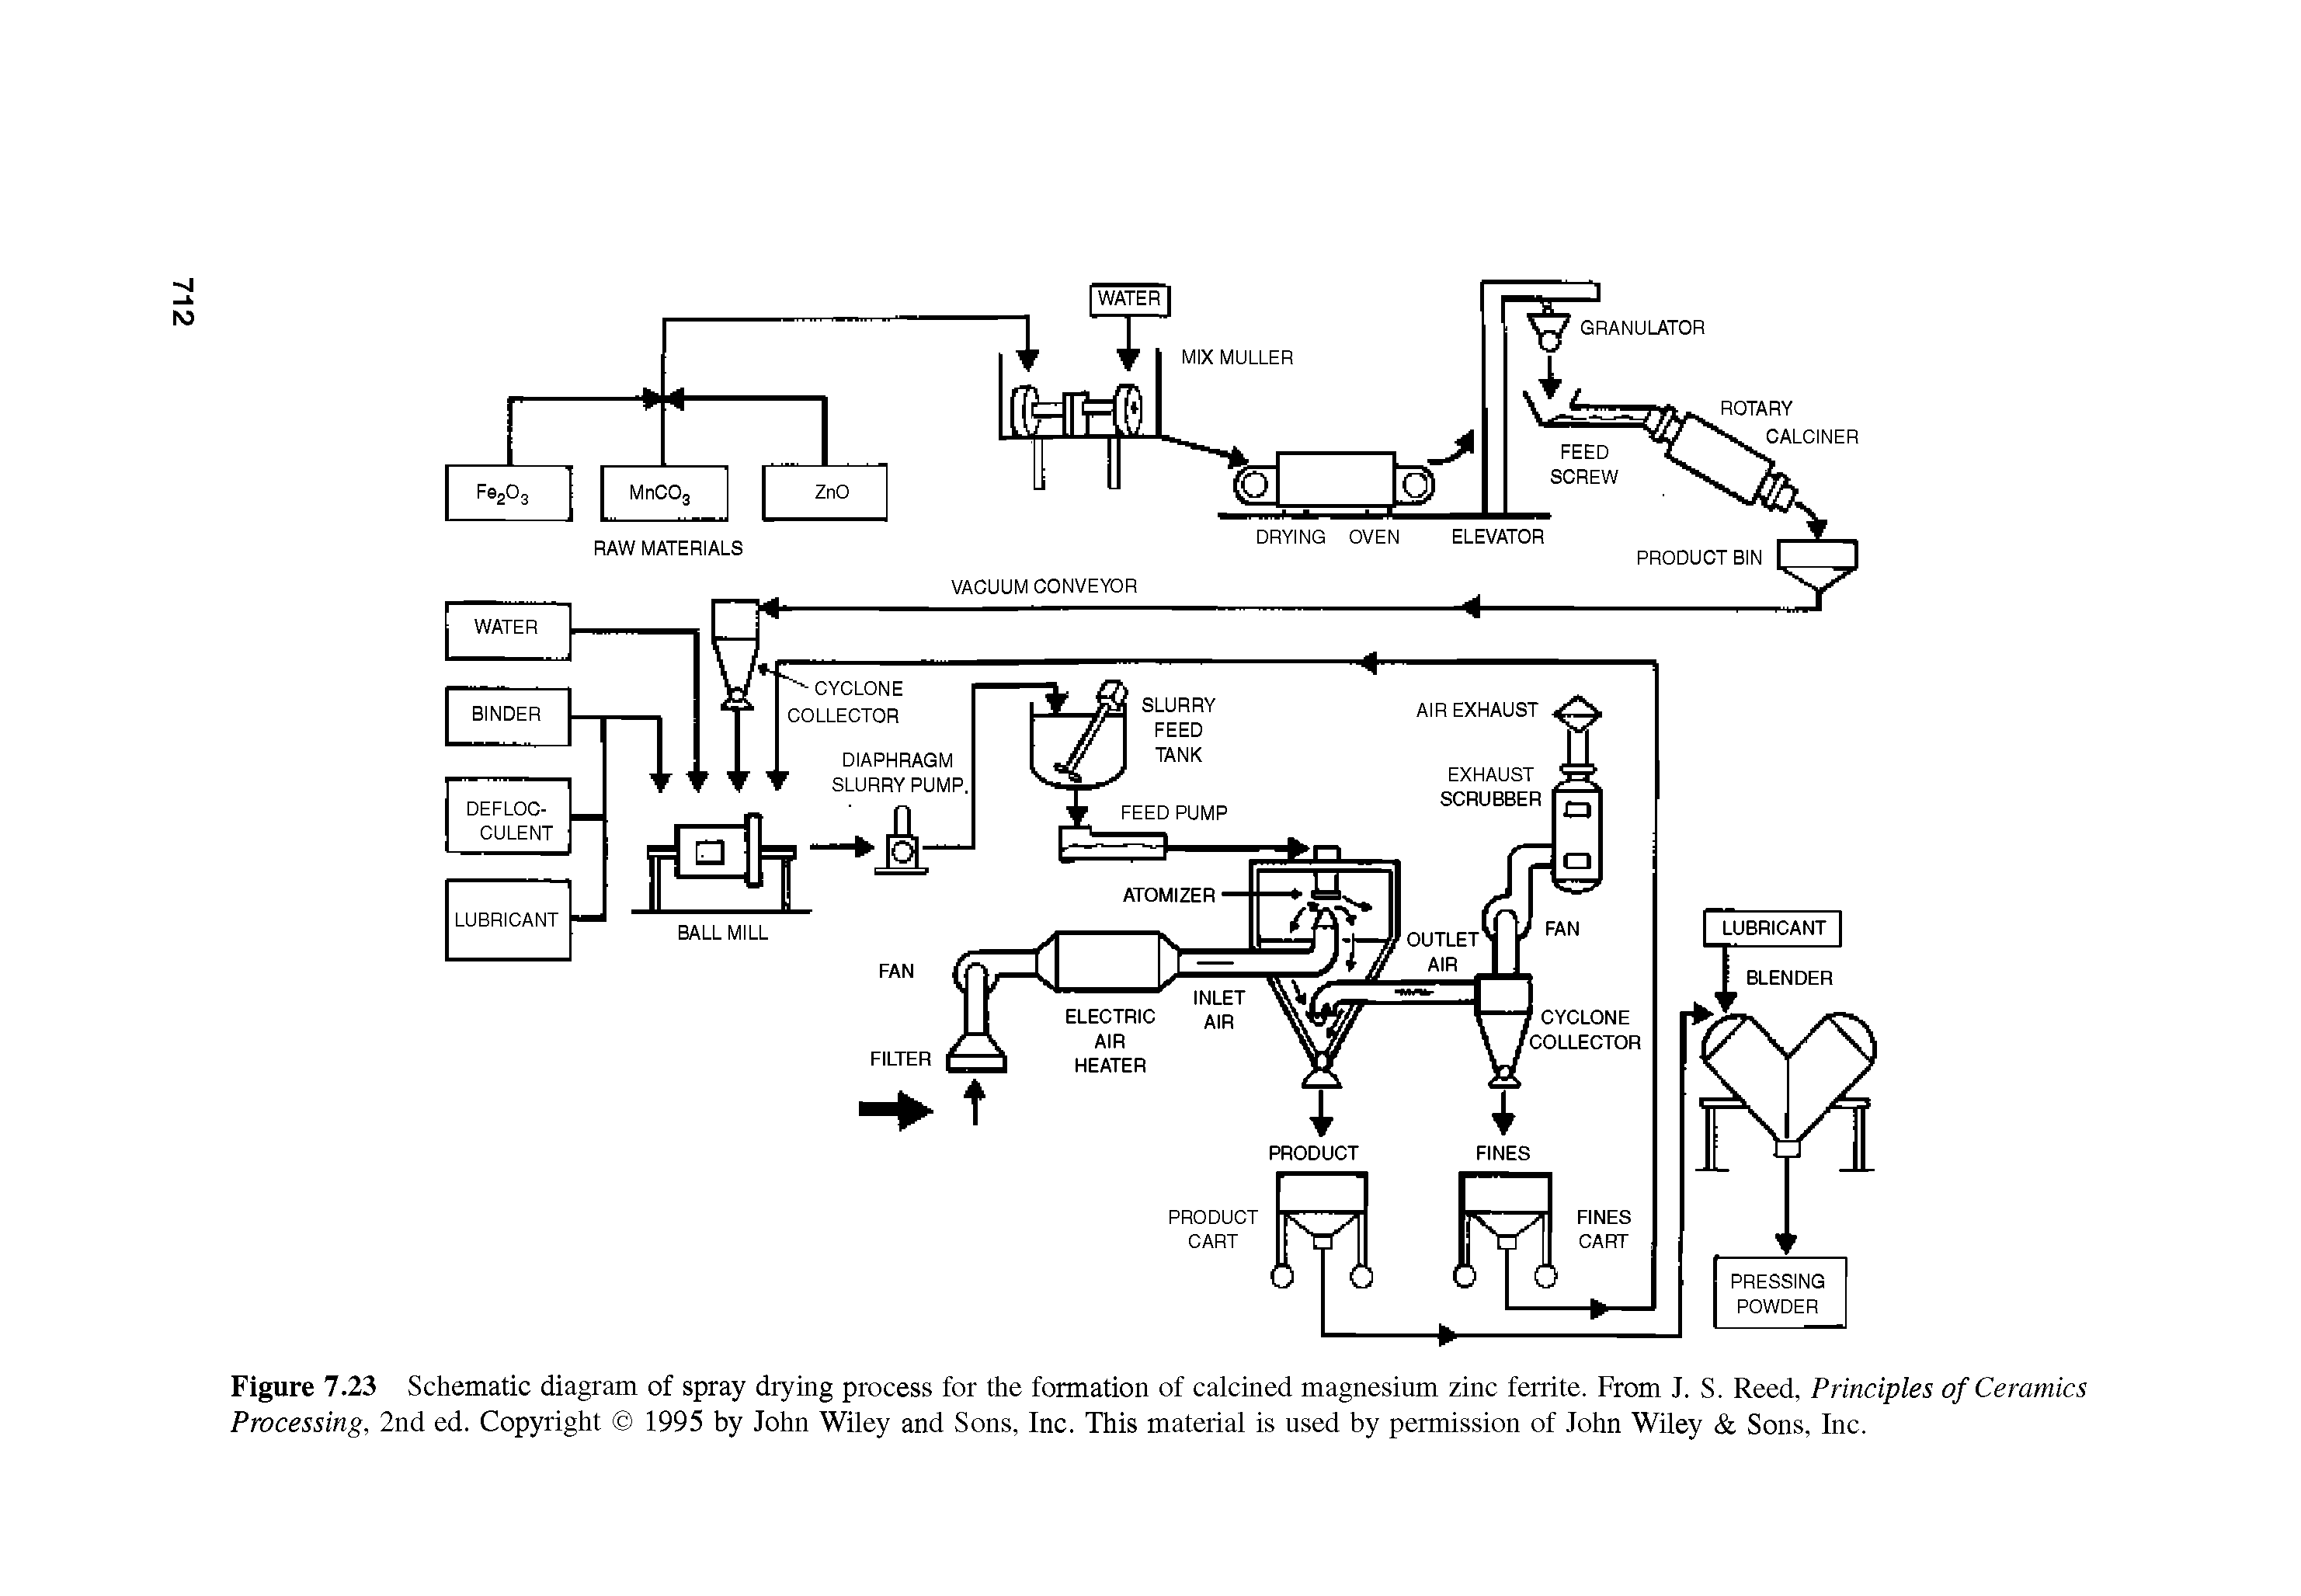 Figure 7.23 Schematic diagram of spray drying process for the formation of calcined magnesium zinc ferrite. From J. S. Reed, Principles of Ceramics Processing, 2nd ed. Copyright 1995 by John Wiley and Sons, Inc. This material is used by permission of John Wiley Sons, Inc.